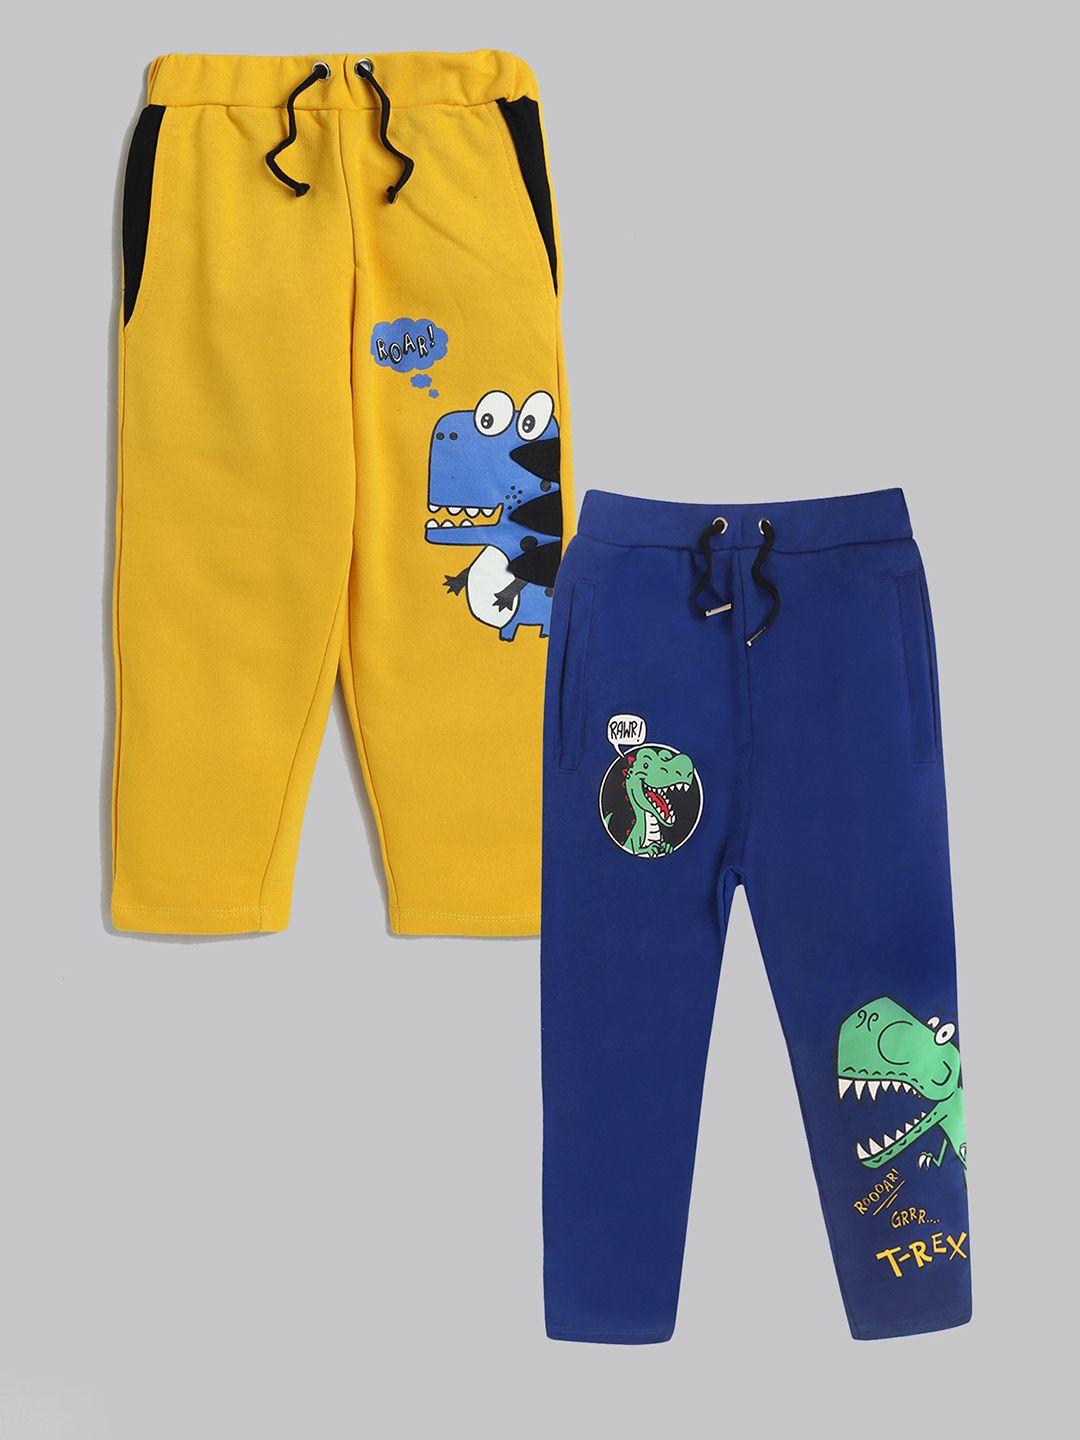 yk boys pack of 2 printed cotton track pants